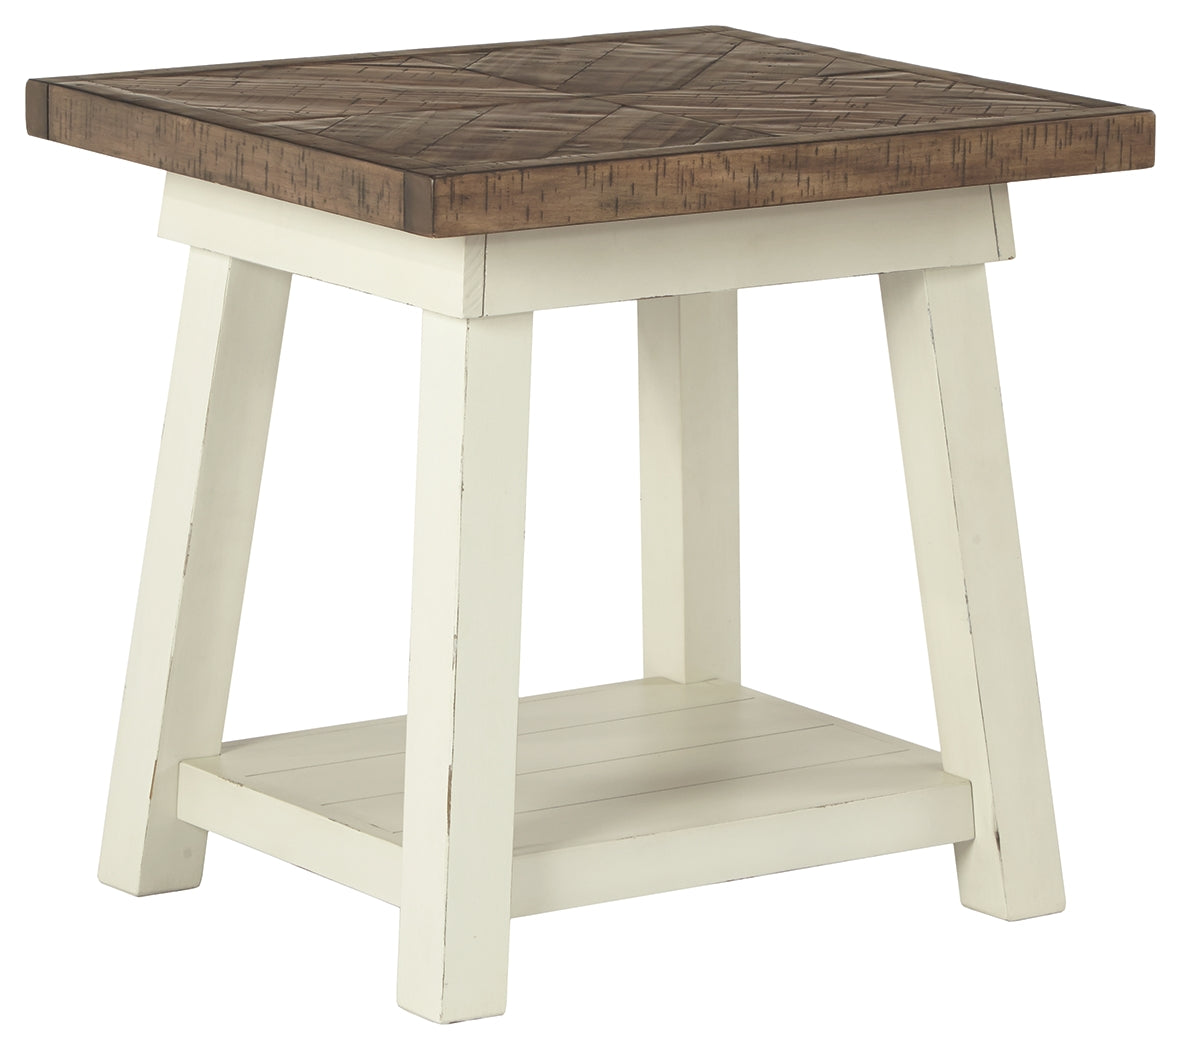 Stownbranner Signature Design by Ashley End Table